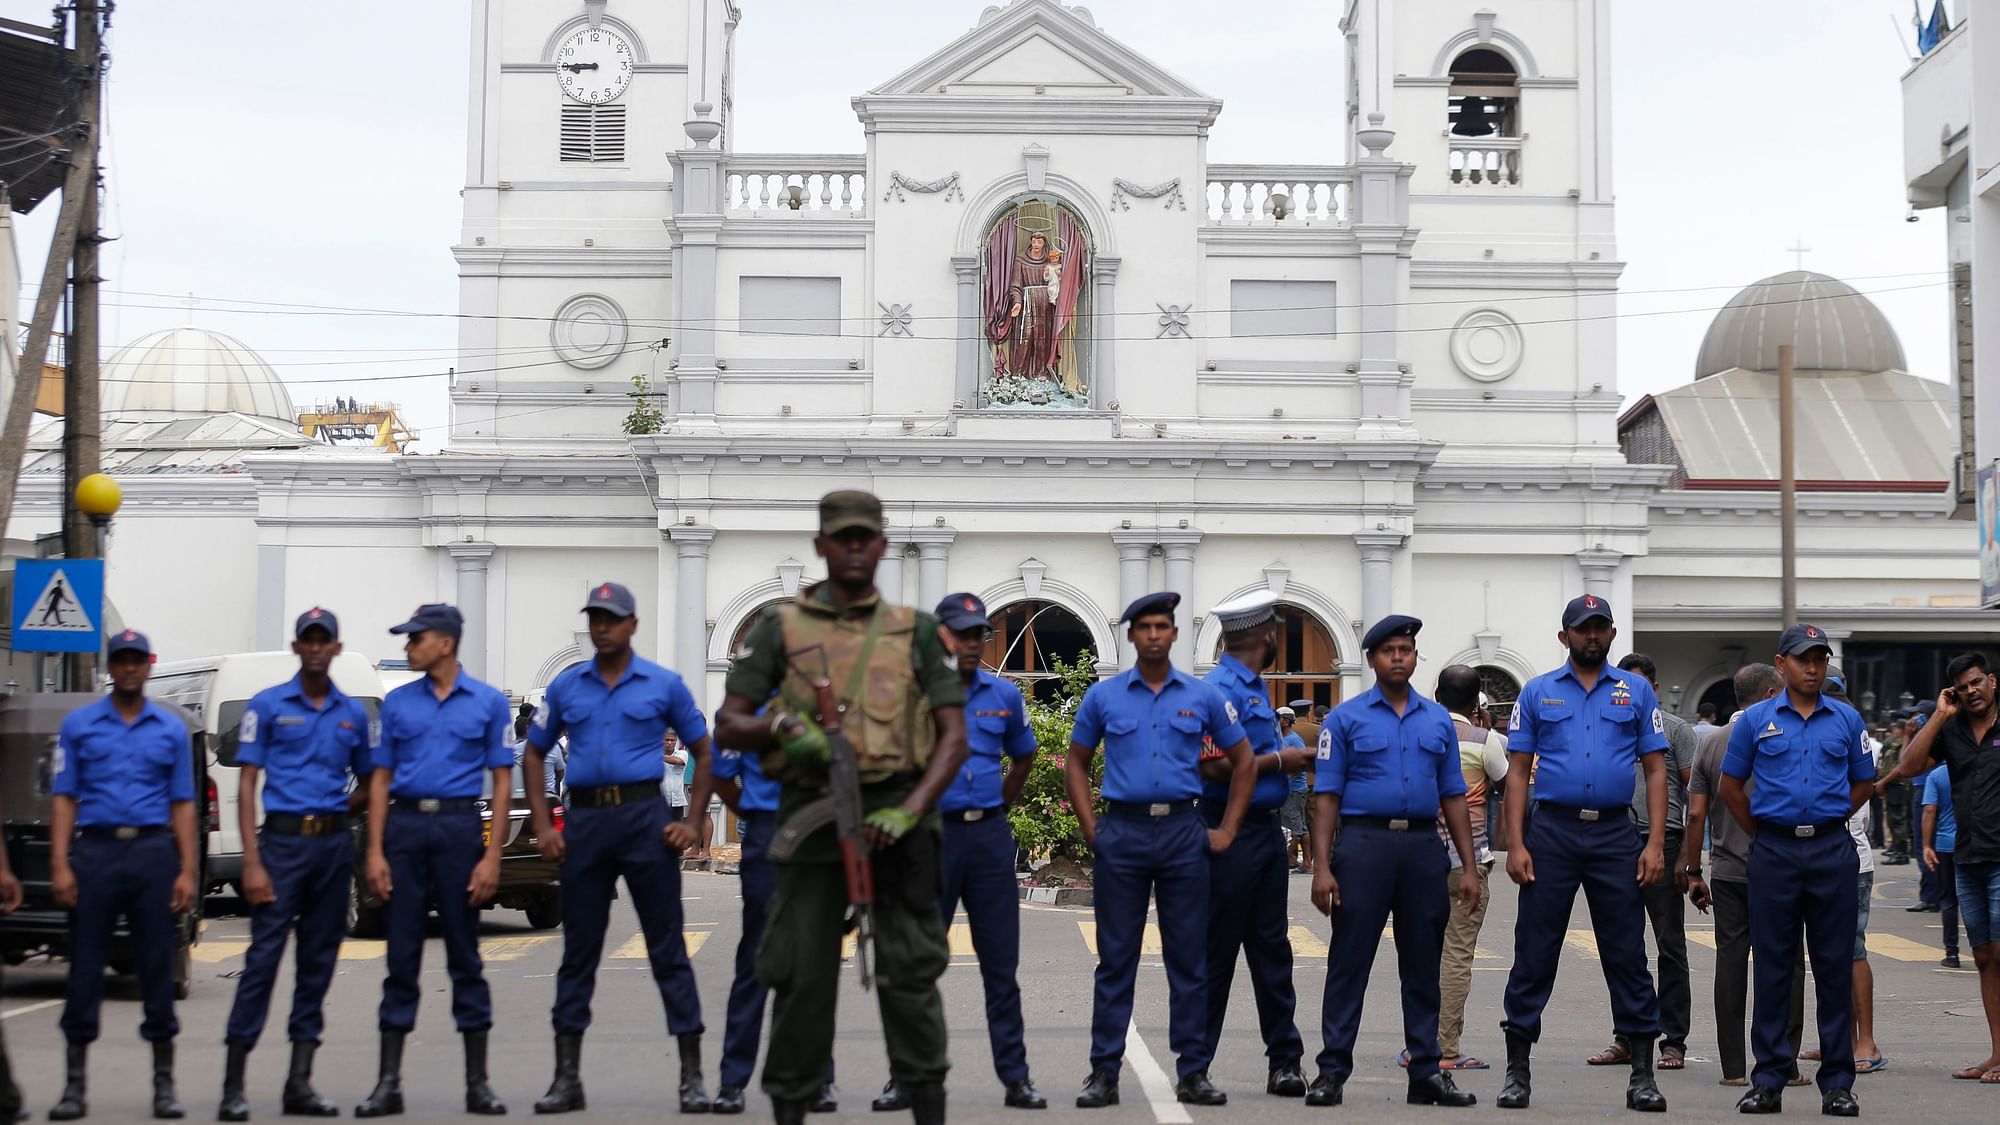 The officials said that the temporary move was meant to curtail the spread of false information and ease tensions. Forces here are seen guarding the area around St. Anthony’s Shrine after Sunday’s bombings.